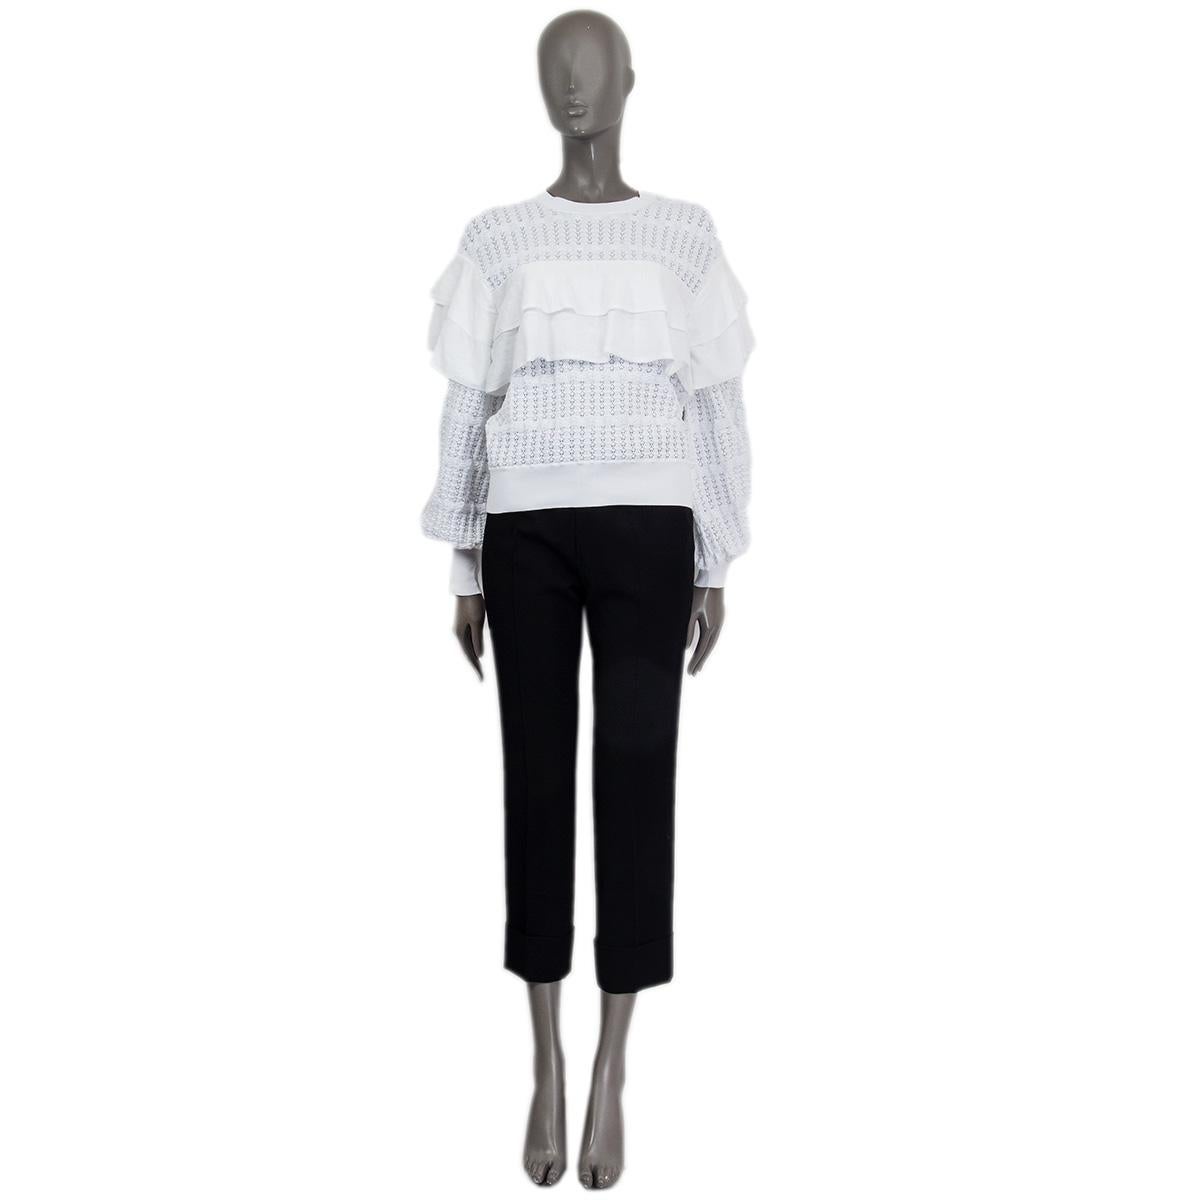 100% authentic Chanel tiered knit sweater in off white cotton (100%) embellished with ruffels on the front, the back and on the shoulders. The sweater is slightly transparent and opens with a creme/white CC button on the back. Has been worn and is